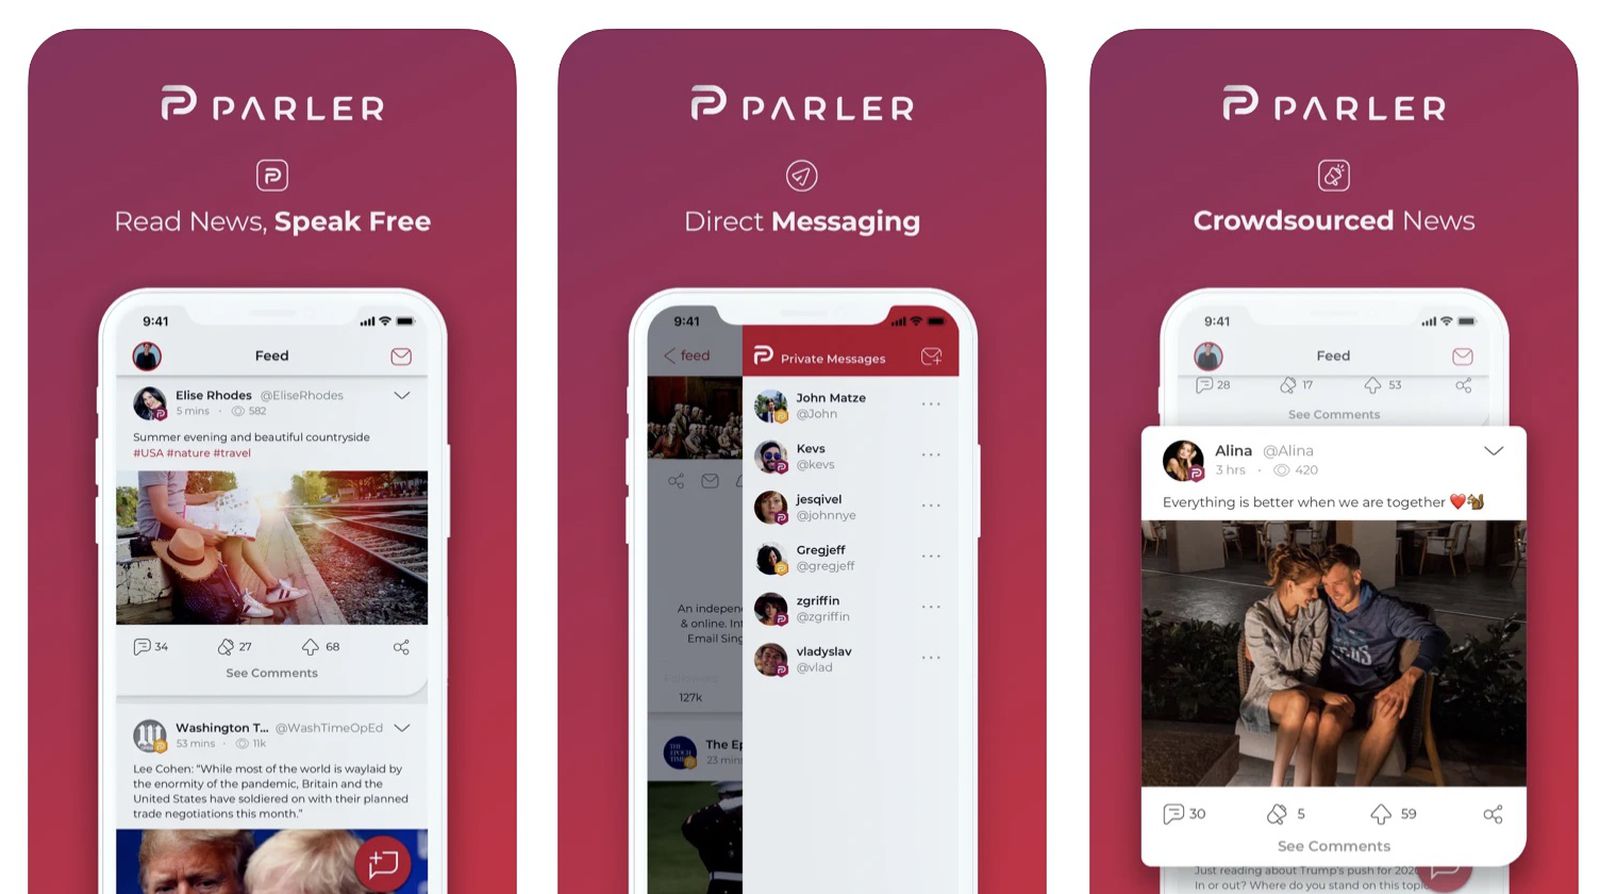 Apple removes Parler from App Store after failing to take “appropriate action” to address dangerous content